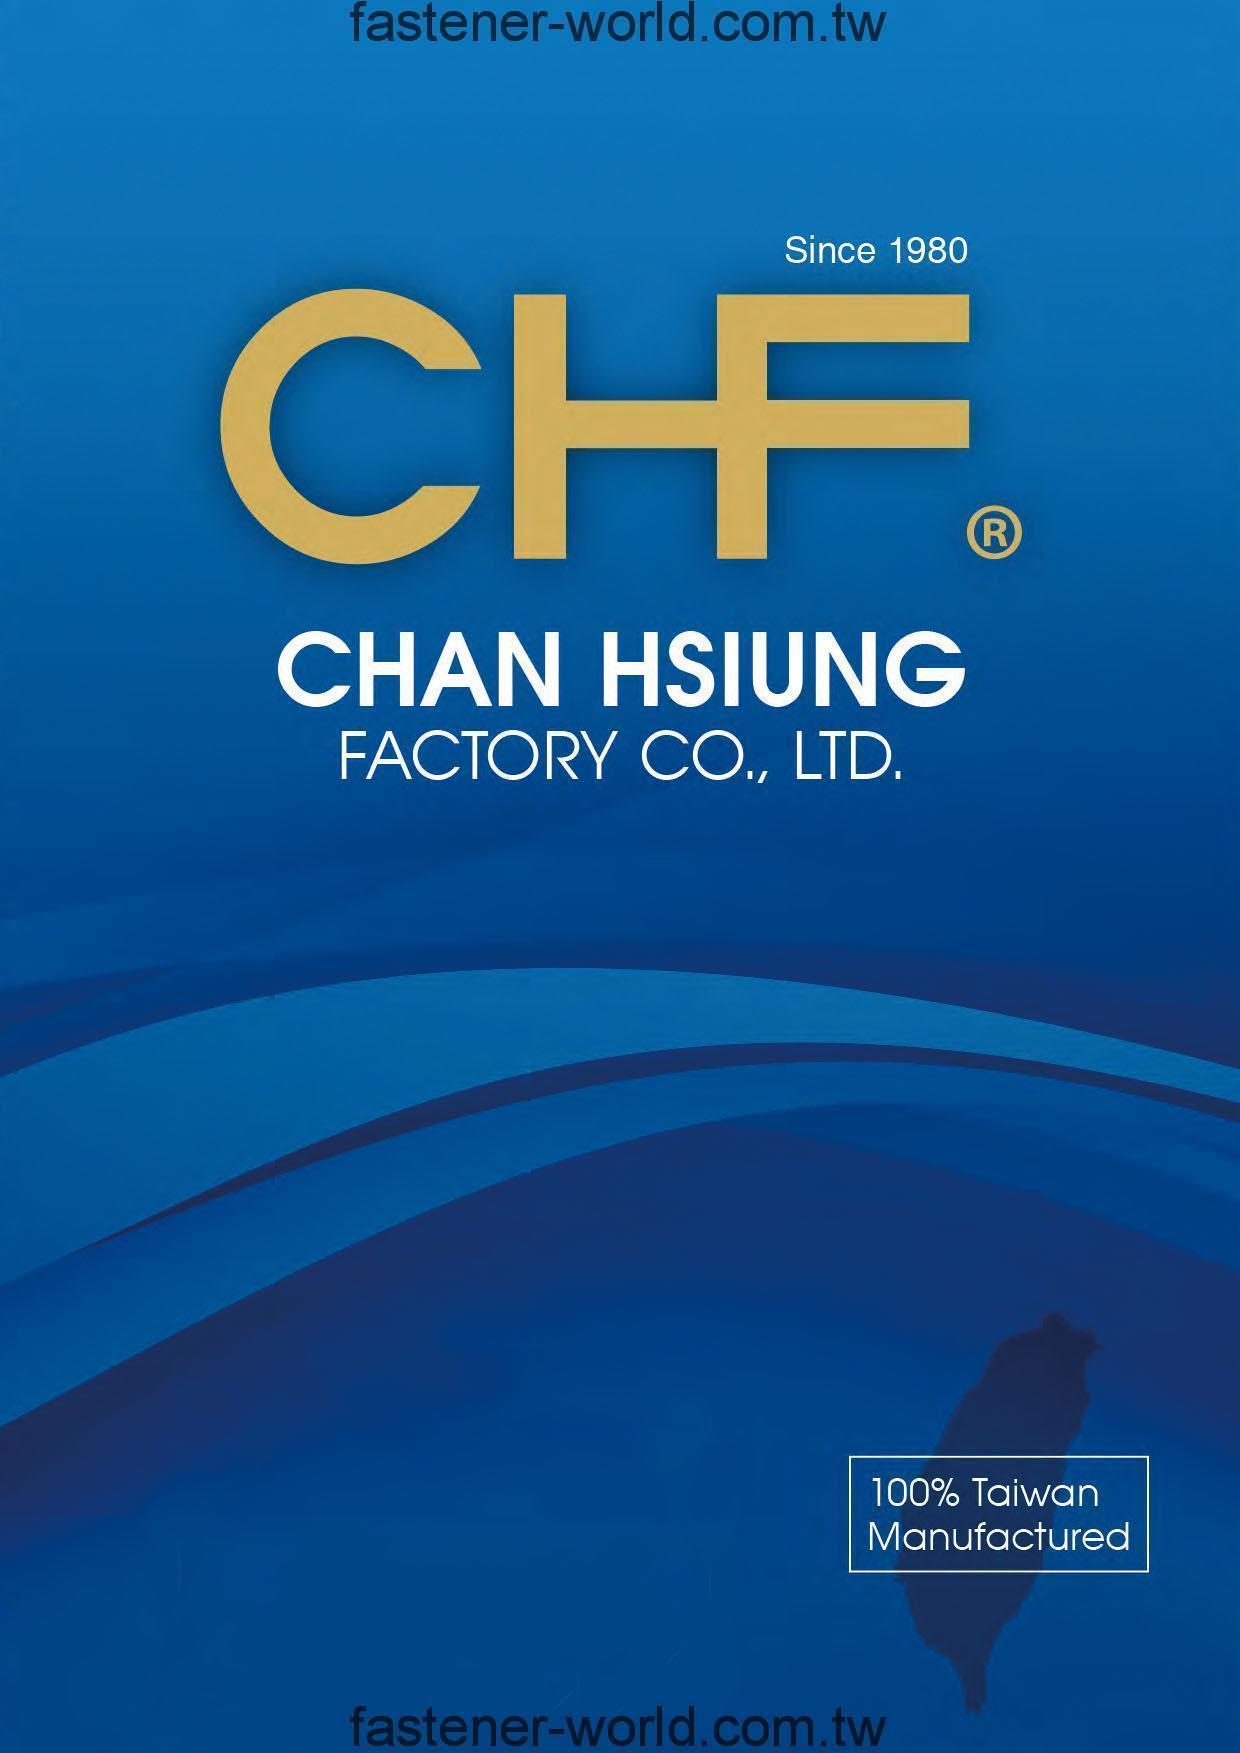 CHAN HSIUNG FACTORY CO., LTD.  Online Catalogues